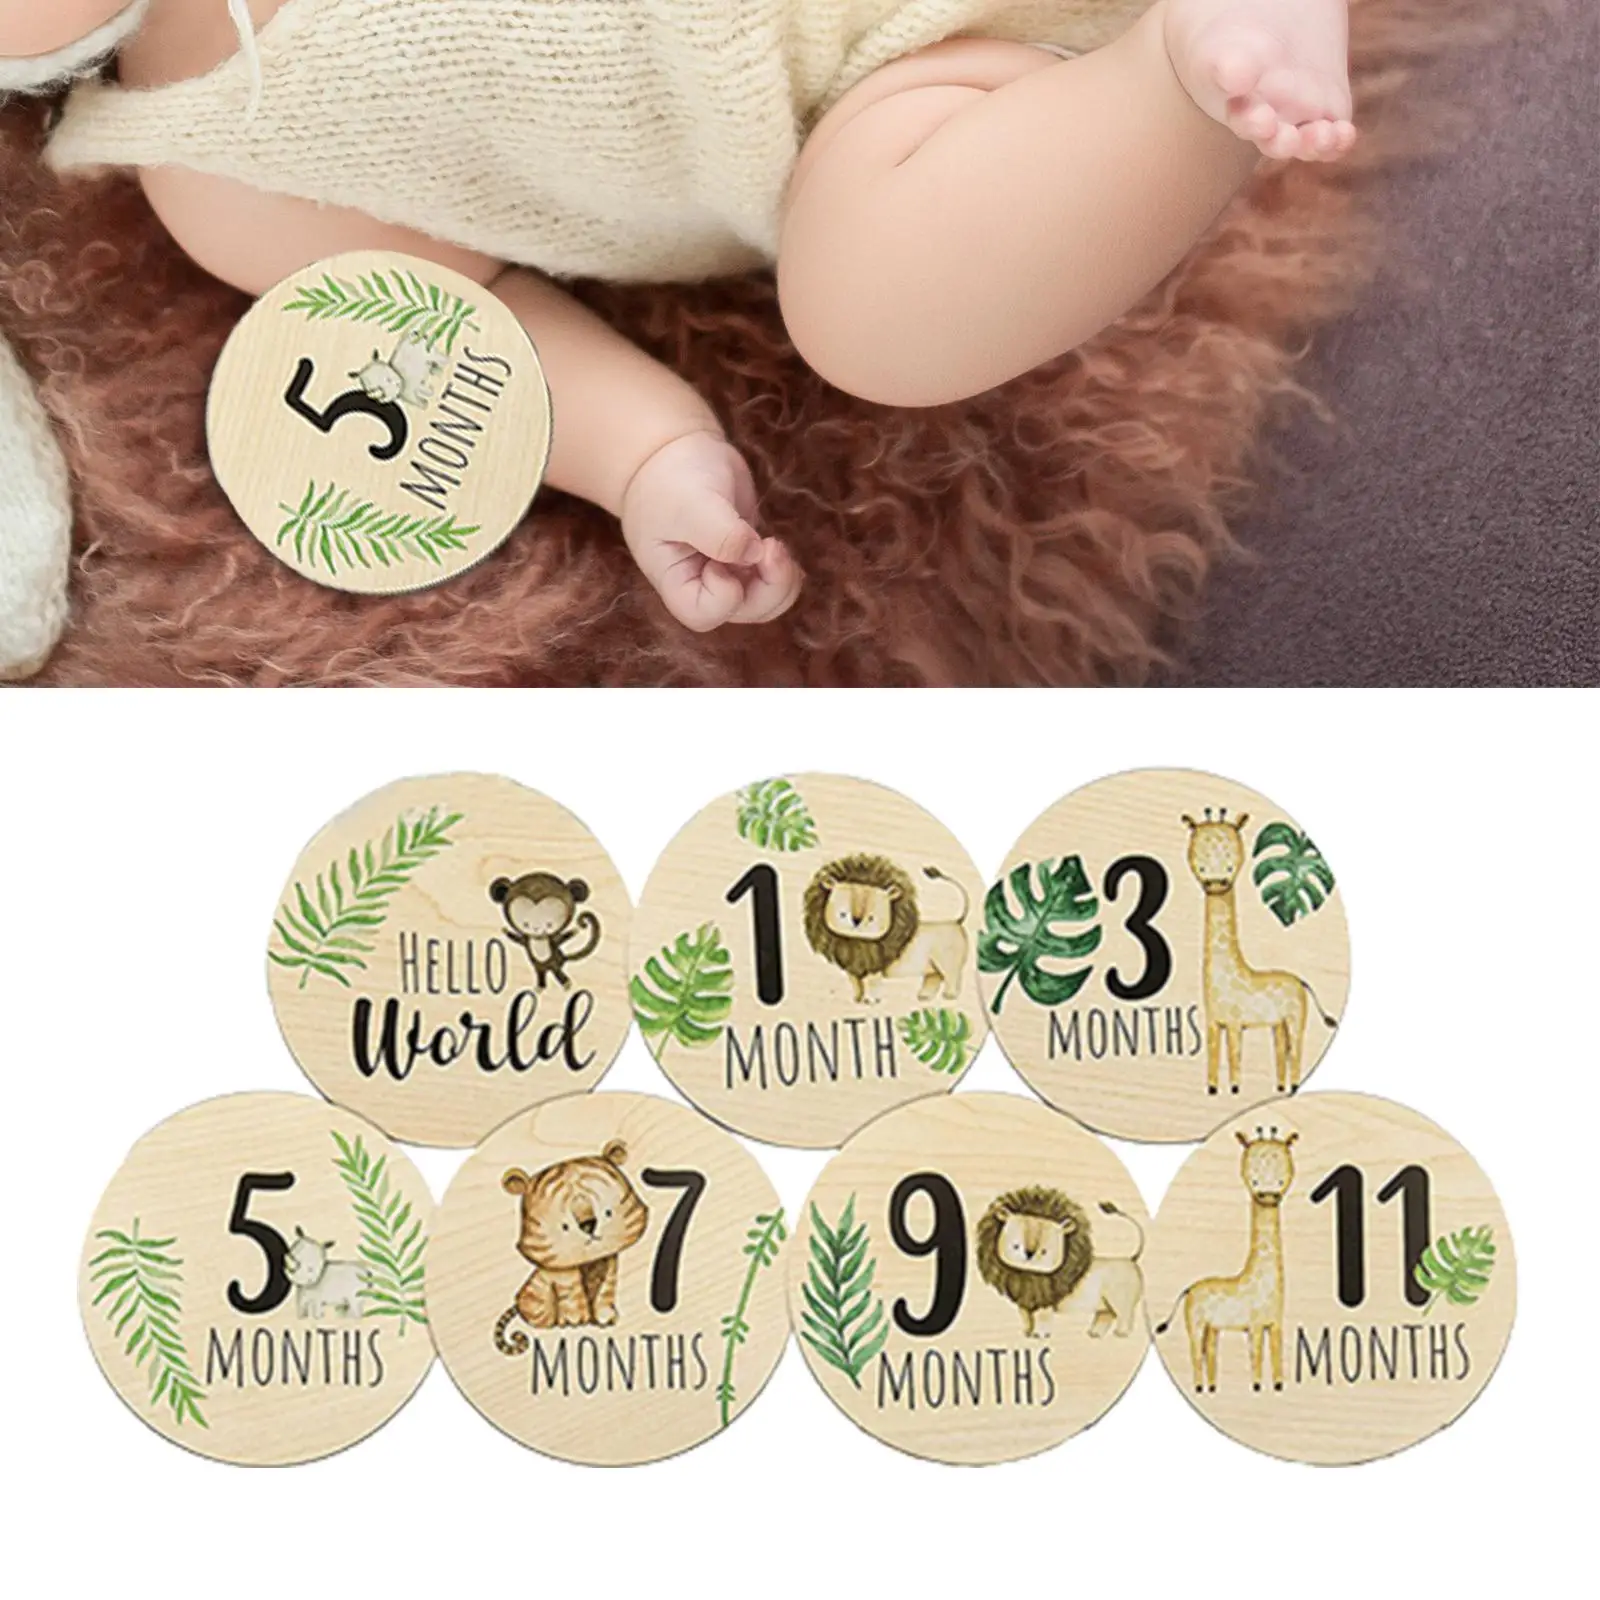 7x Wooden Baby Milestone Cards Baby Months Signs 1-12 Months Newborn Photoshoot Props for Baby Growth Home Table Decoration